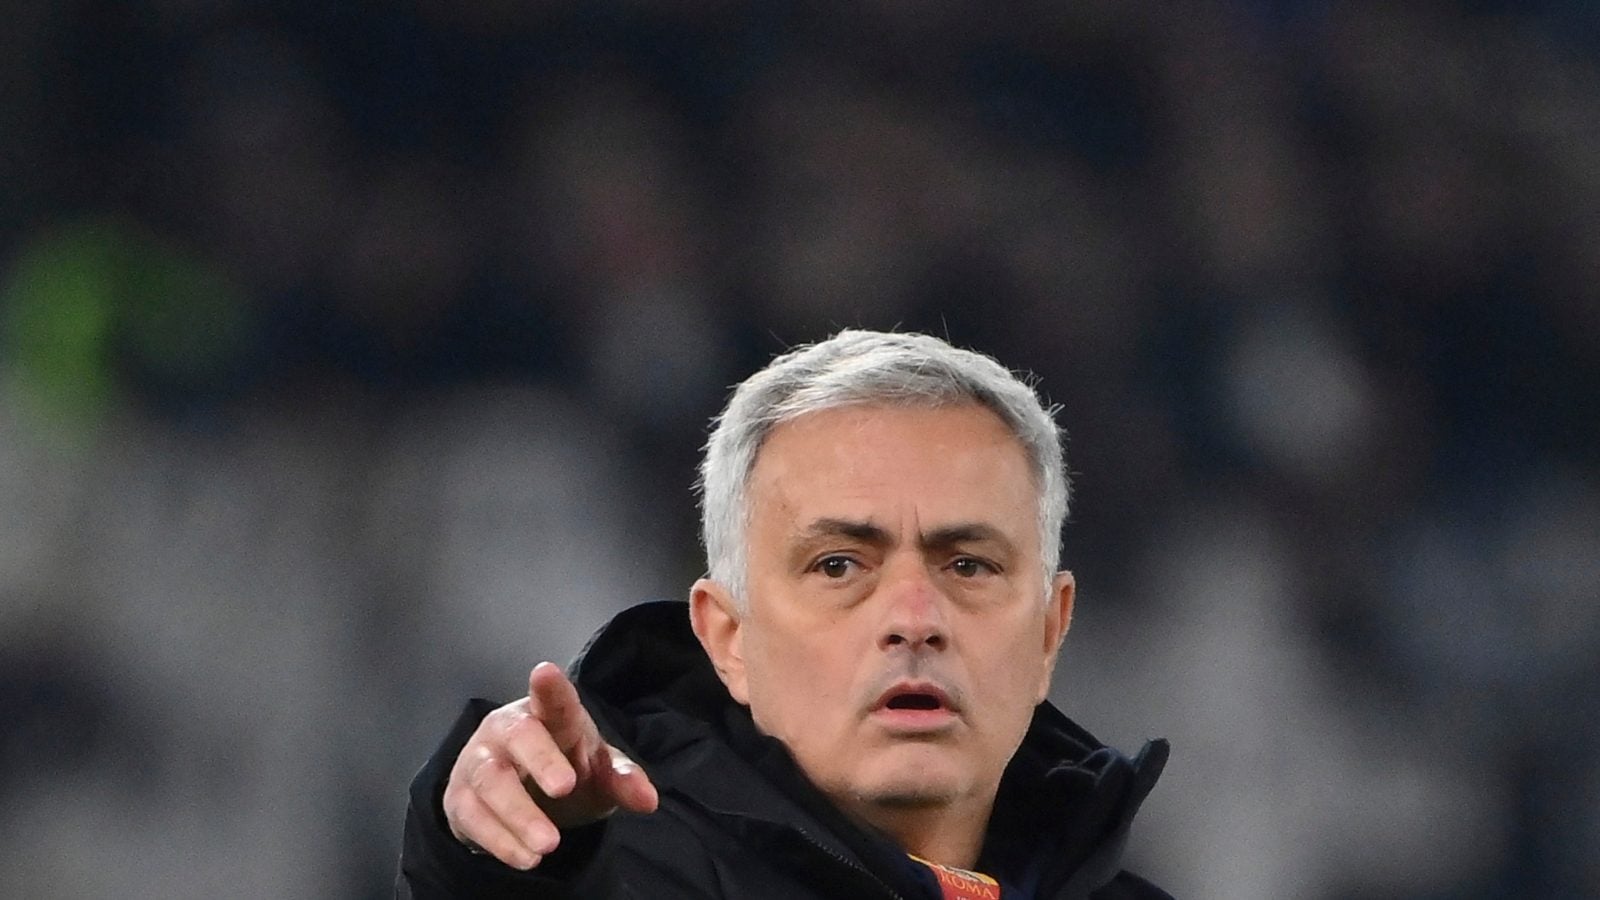 Jose Mourinho Handed Two-game Touchline Ban After Kicking Bal into Stands